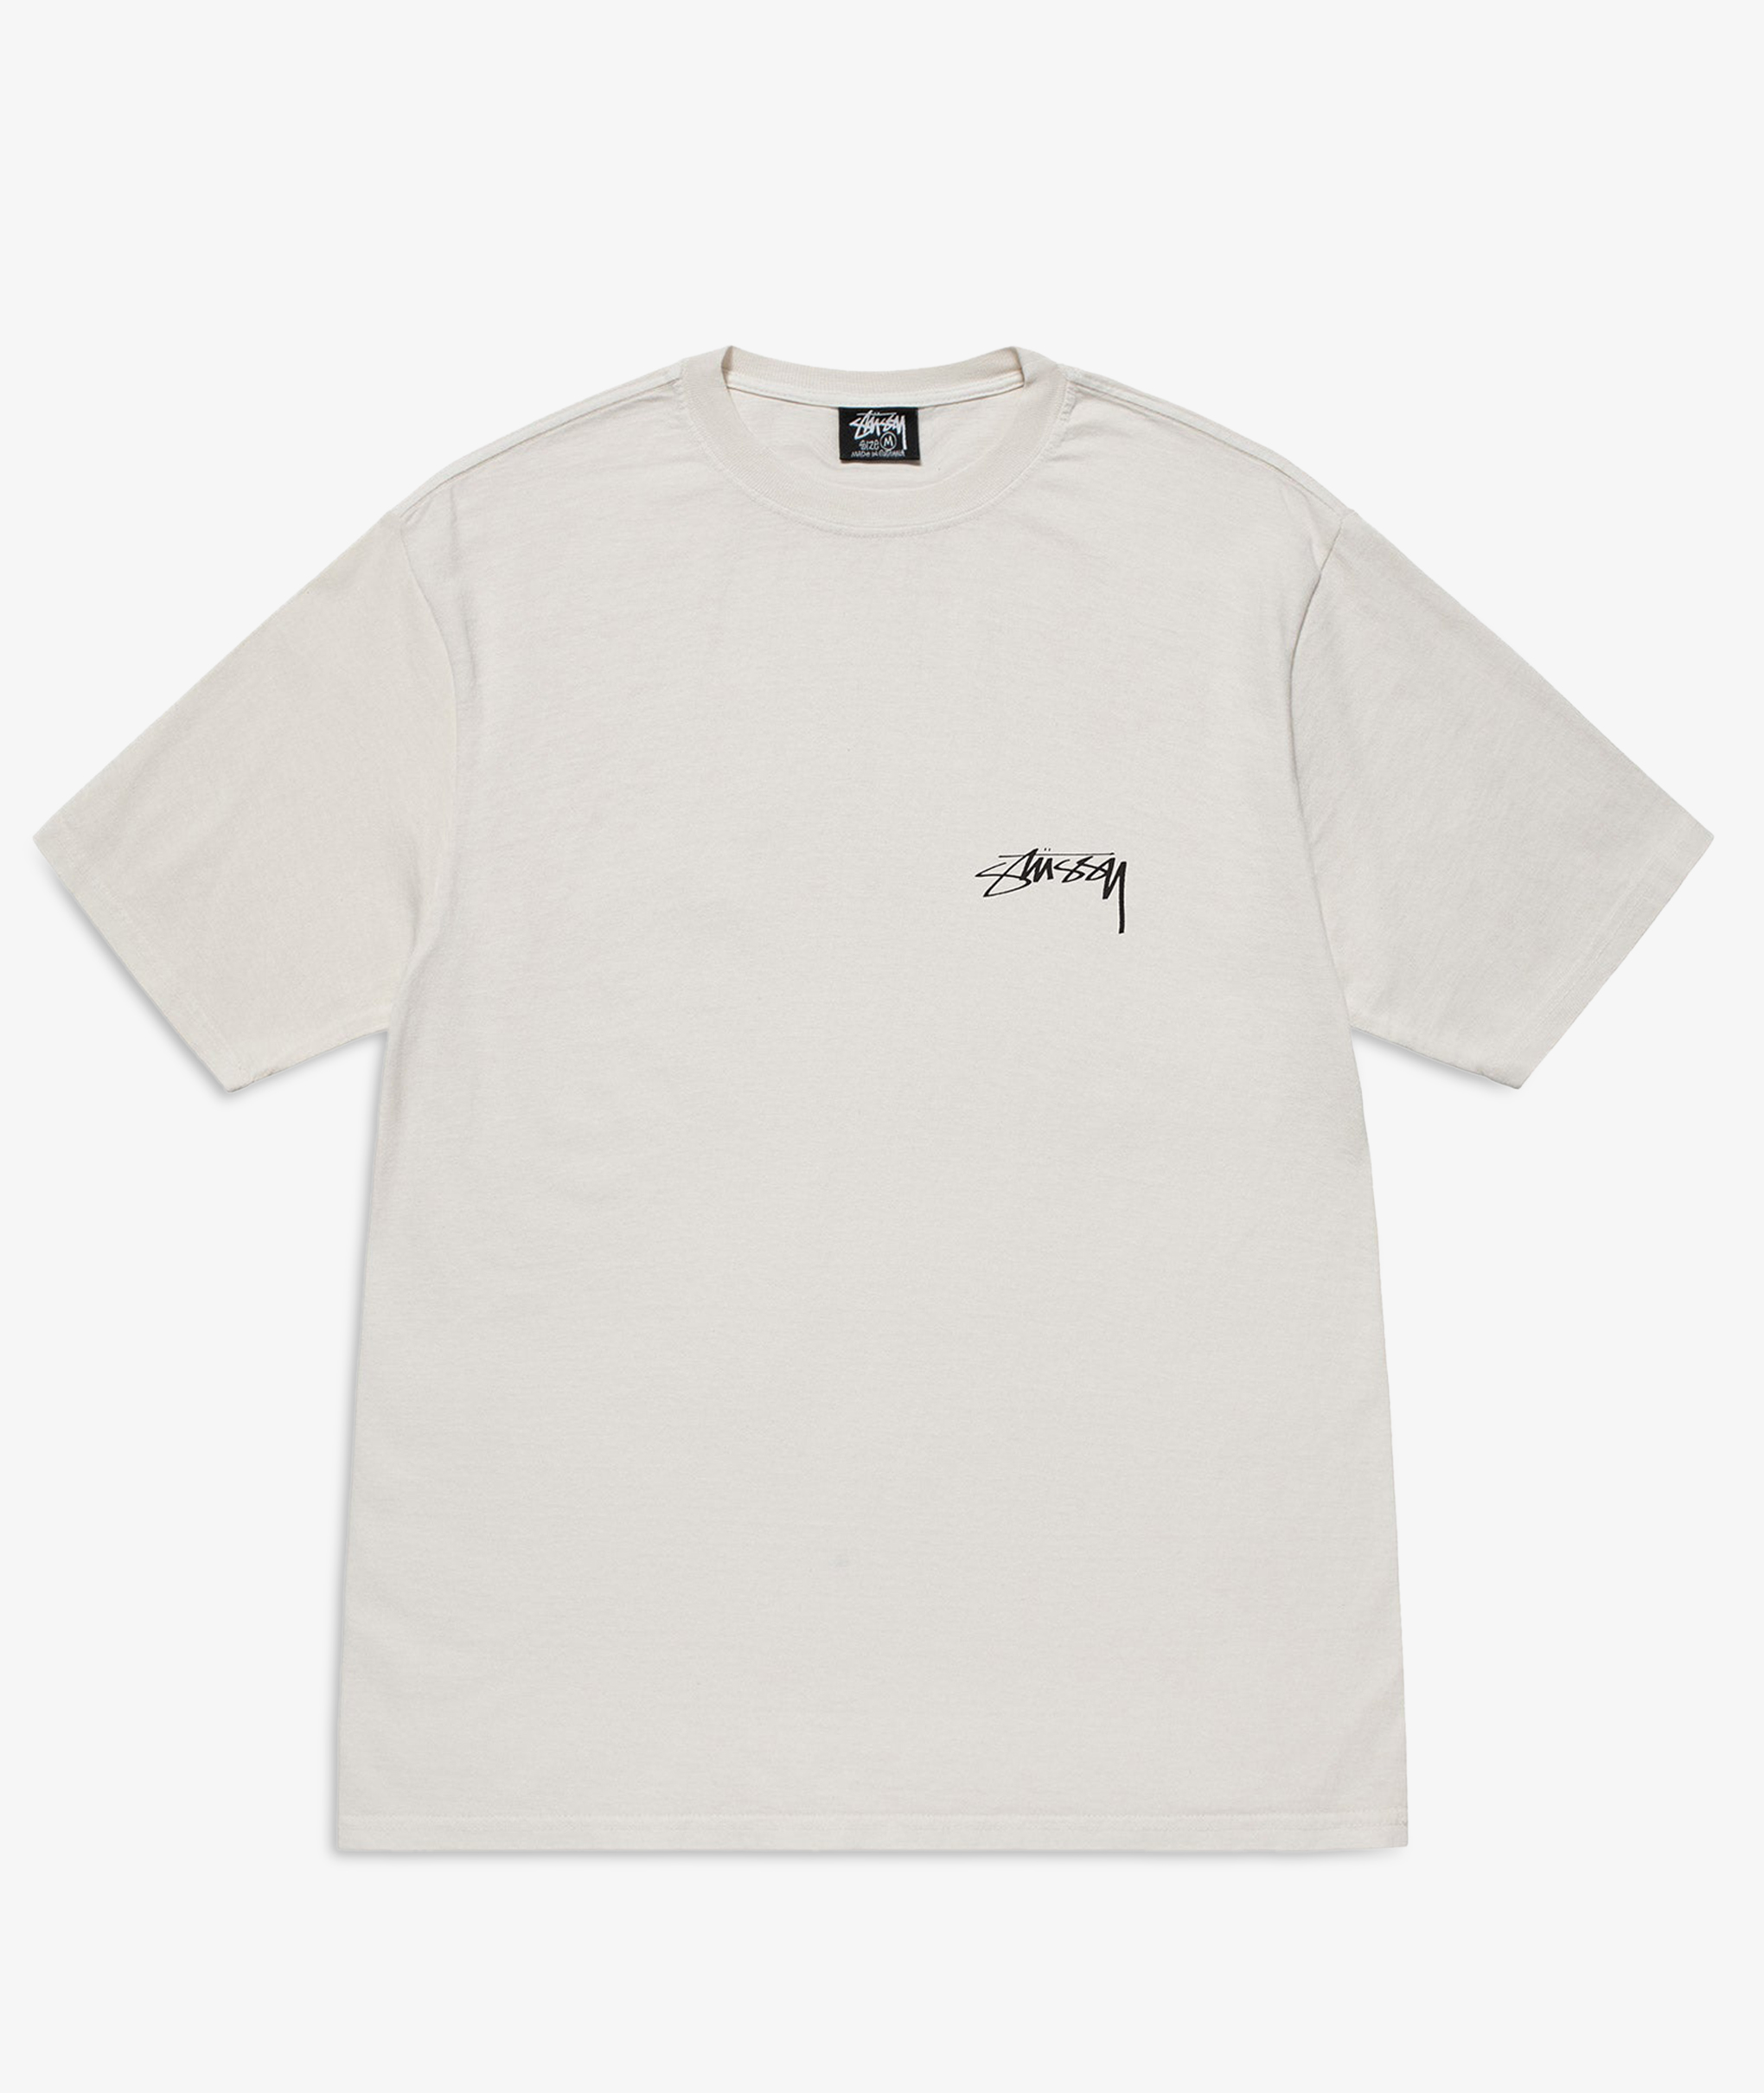 Norse Store | Shipping Worldwide - Stussy 100% Pigment Dyed Tee 